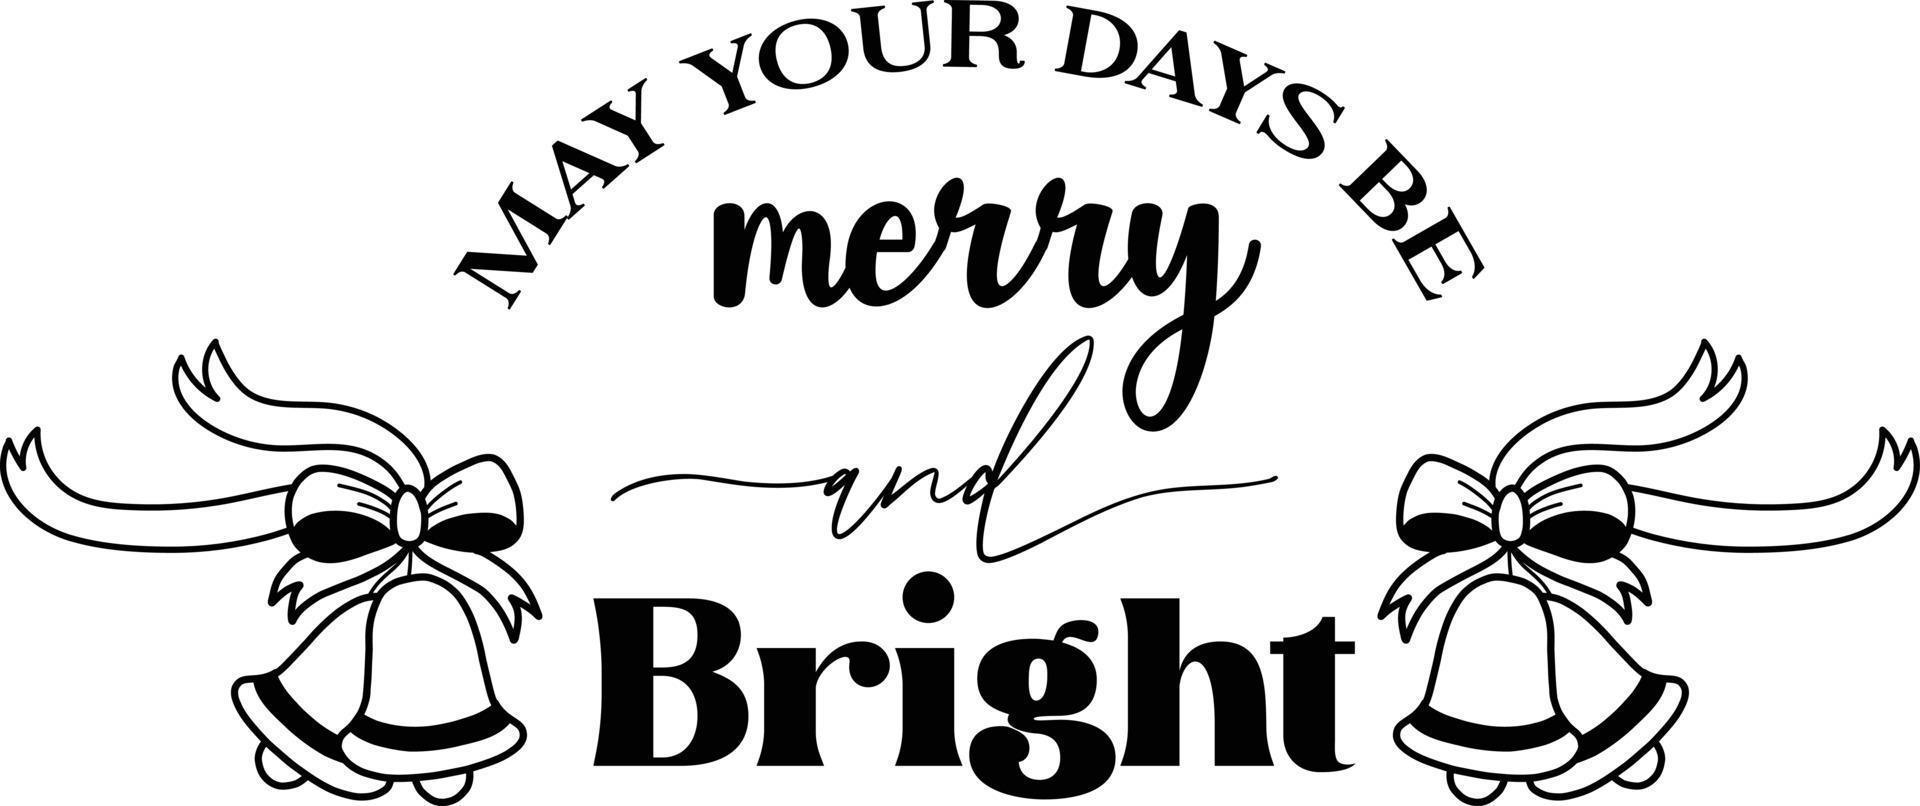 may your days be merry and bright lettering and quote illustration vector